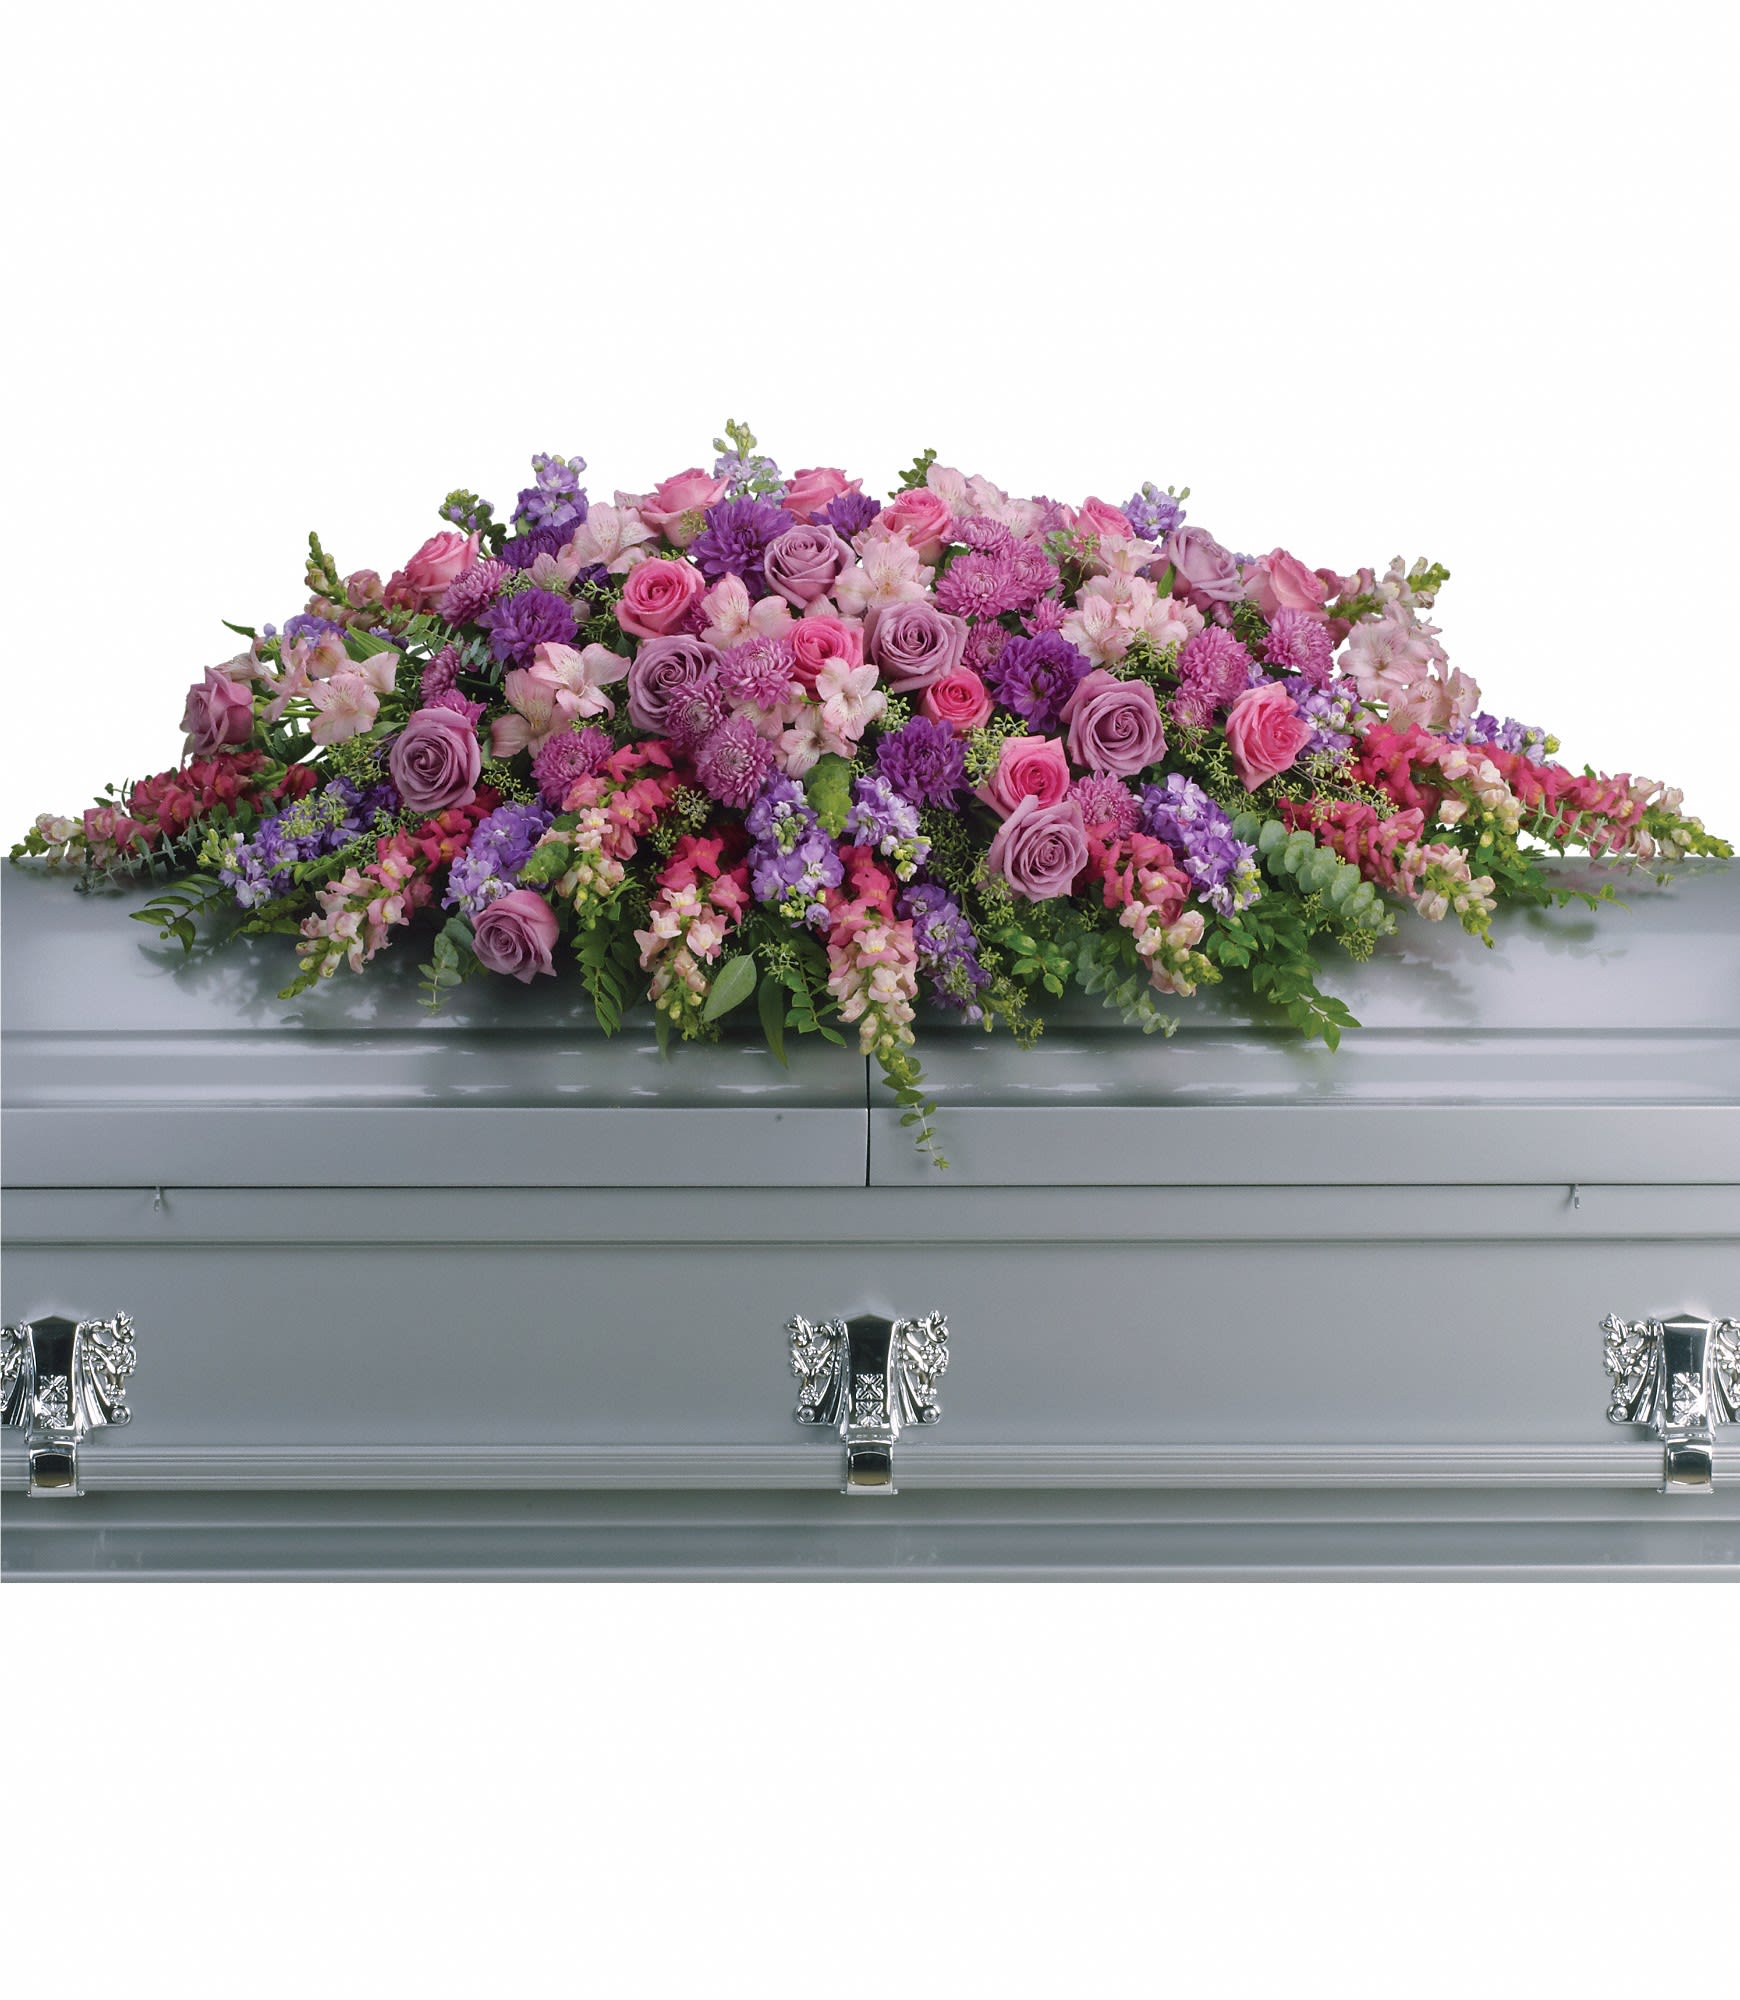 Lavender Tribute Casket Spray - Like a heartfelt embrace, this beautiful casket spray delivers comfort and love in an extraordinary way. A wonderful array of lavender and pink flowers with just the right amount of greenery is a lovely way to pay tribute to someone who will always be with you in heart, mind and spirit. T235-2A 